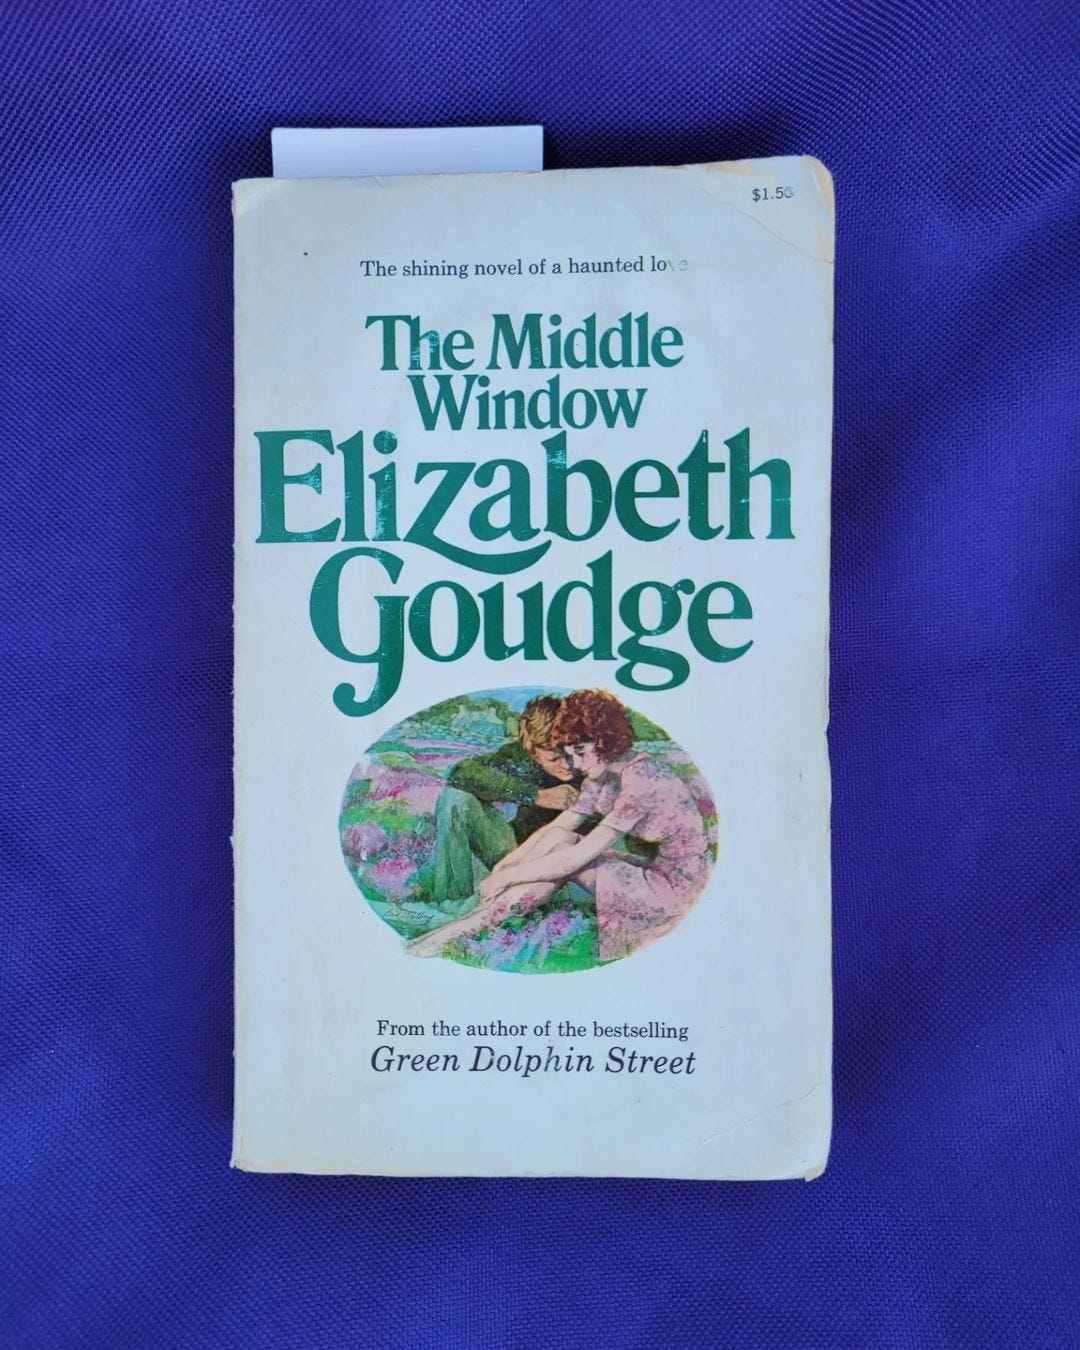 Paperback of The Middle Window by Goudge. Photo by Stephanie Nygaard